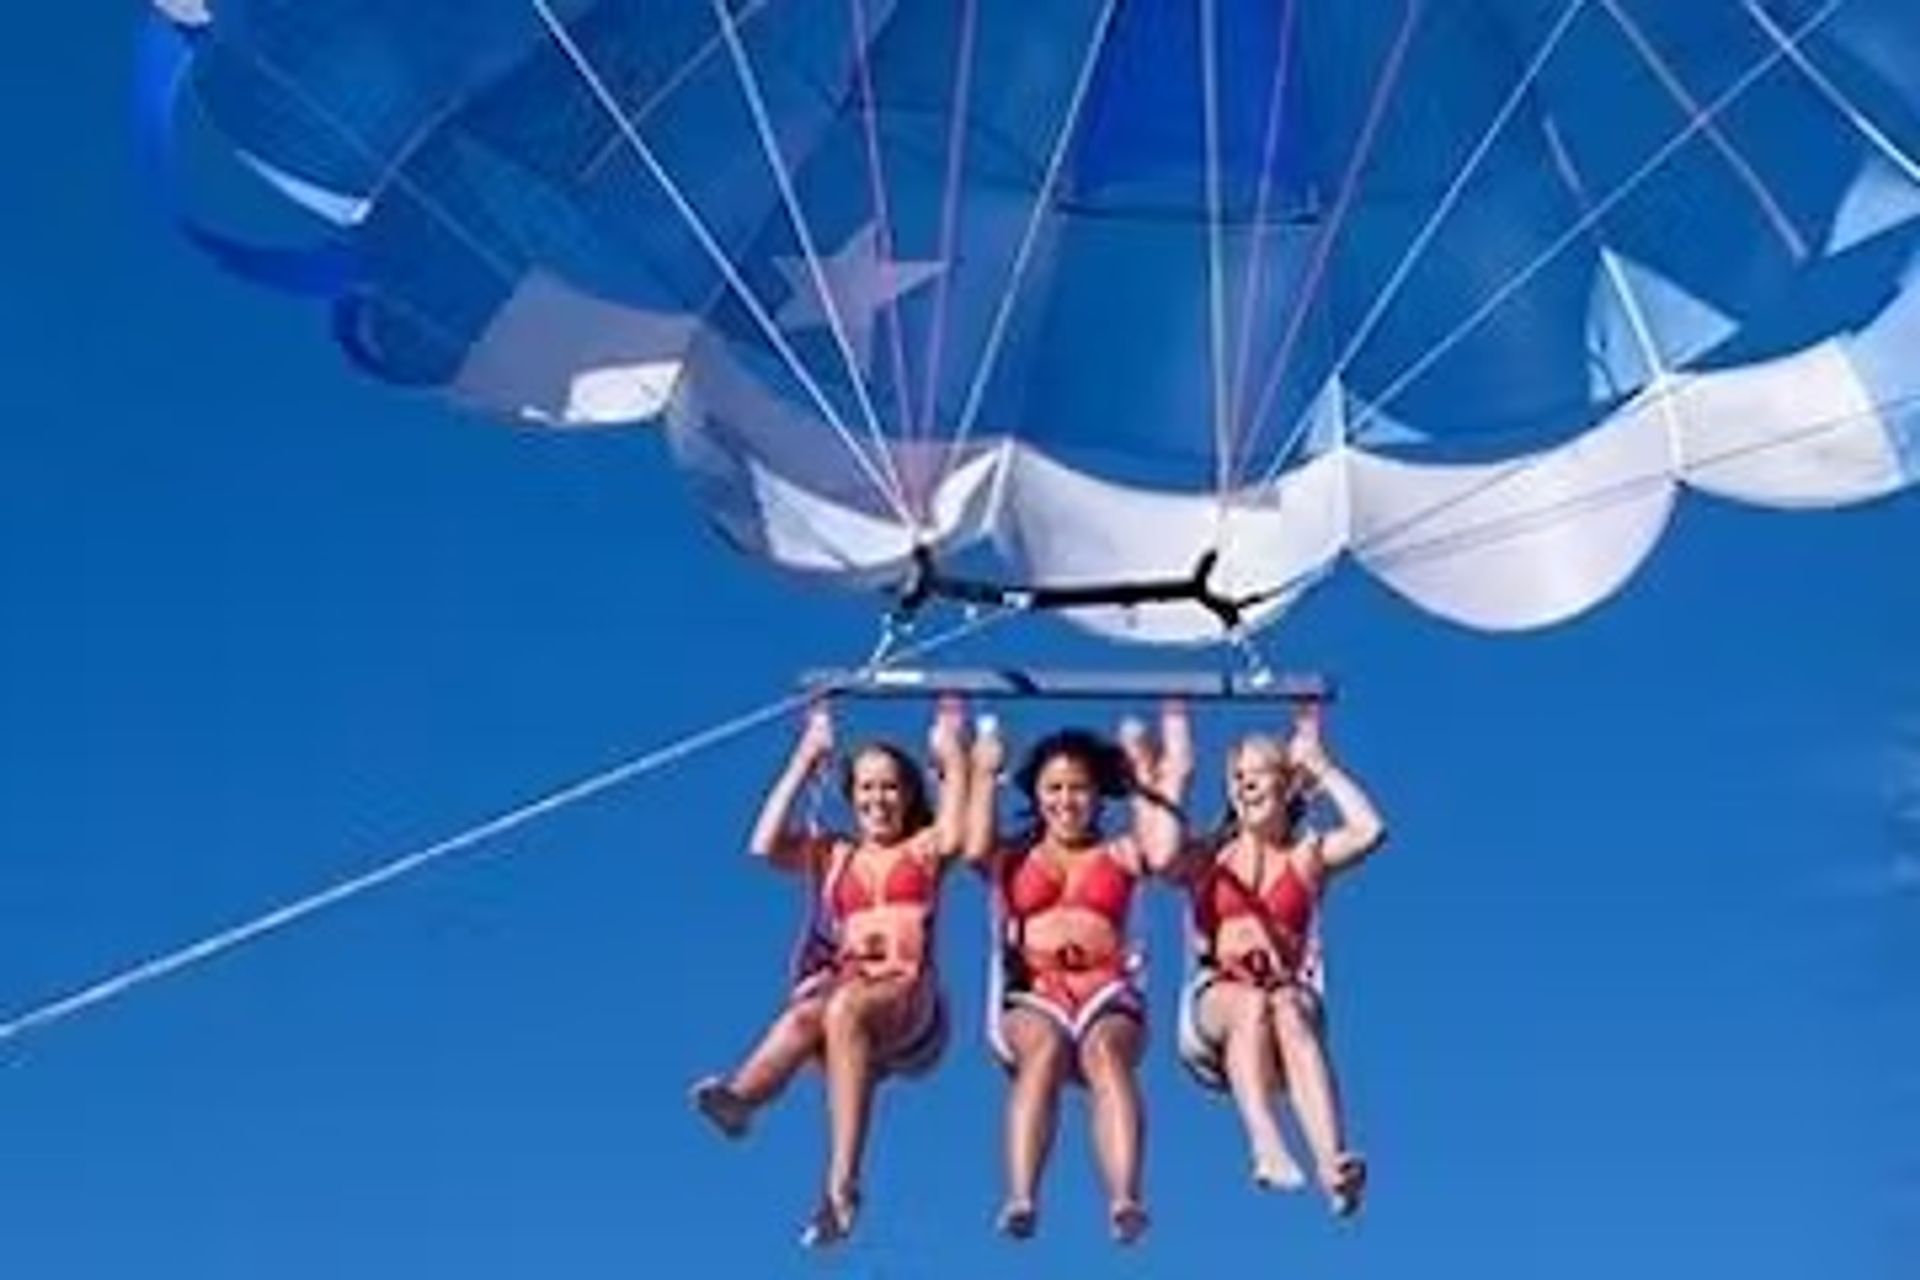 Thrills & Chill: Parasailing Over Scenic Lake Tahoe image 1